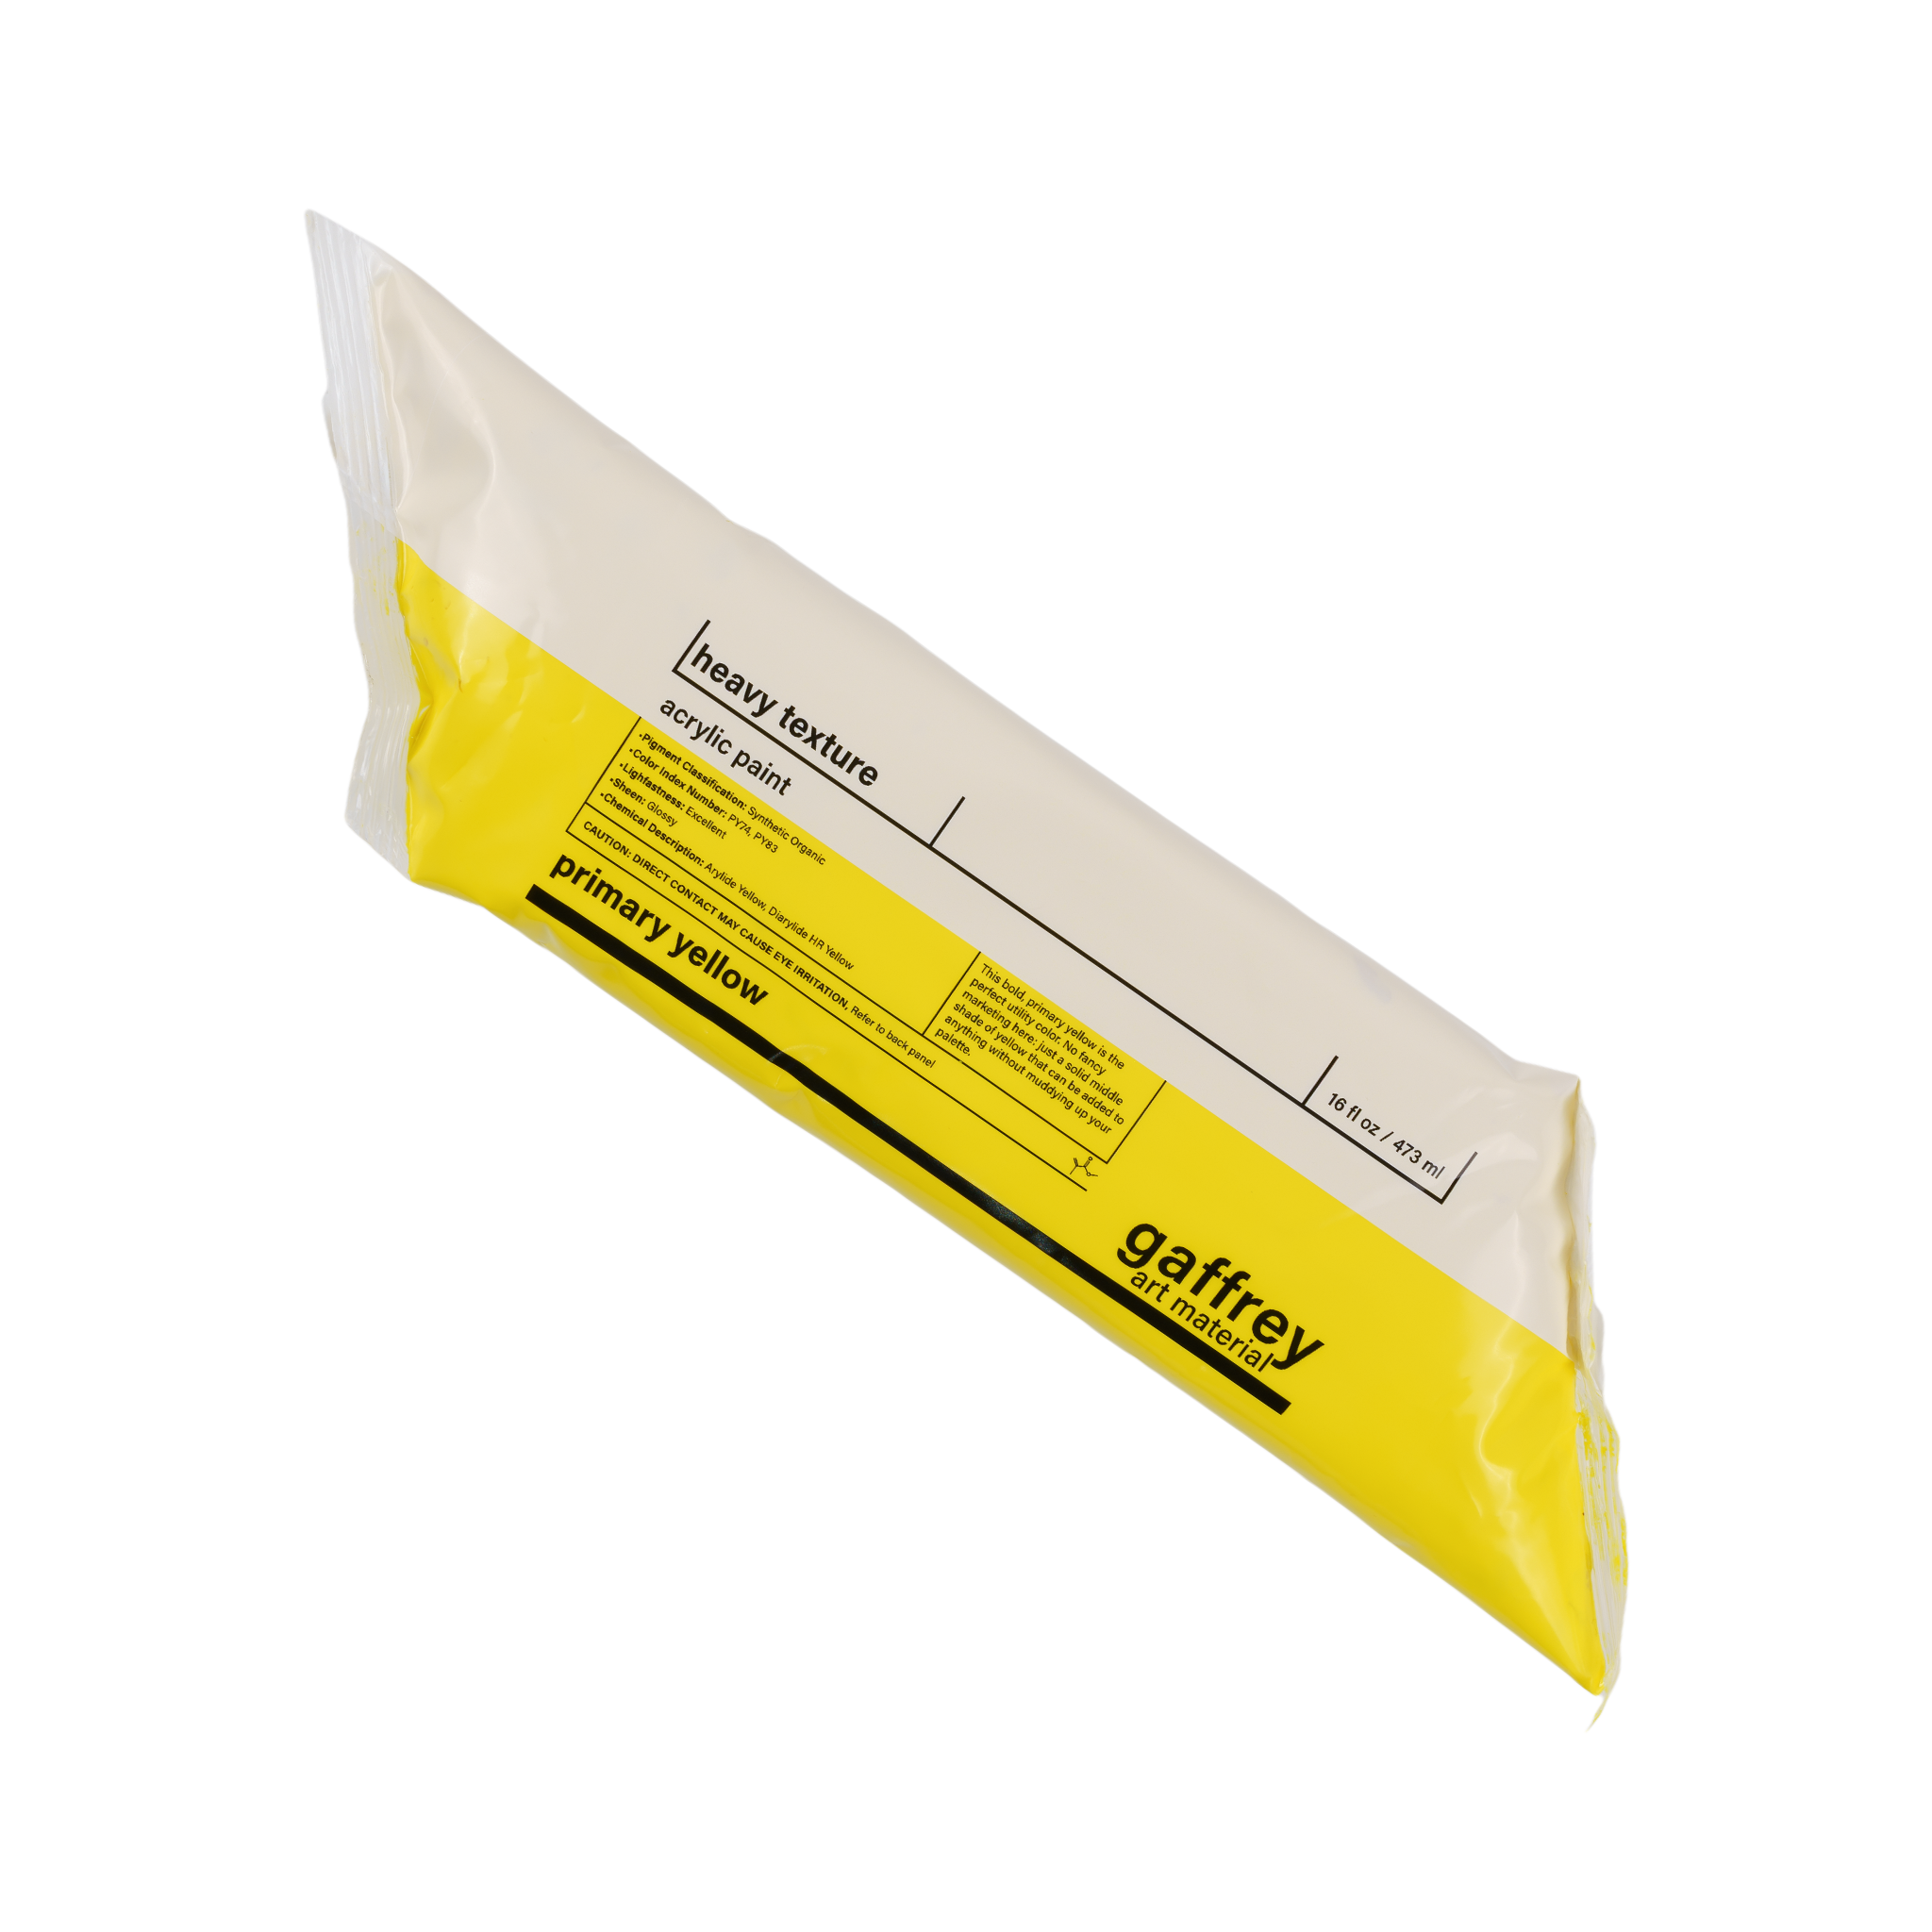 Primary Yellow Heavy Texture - Gaffrey Art Material